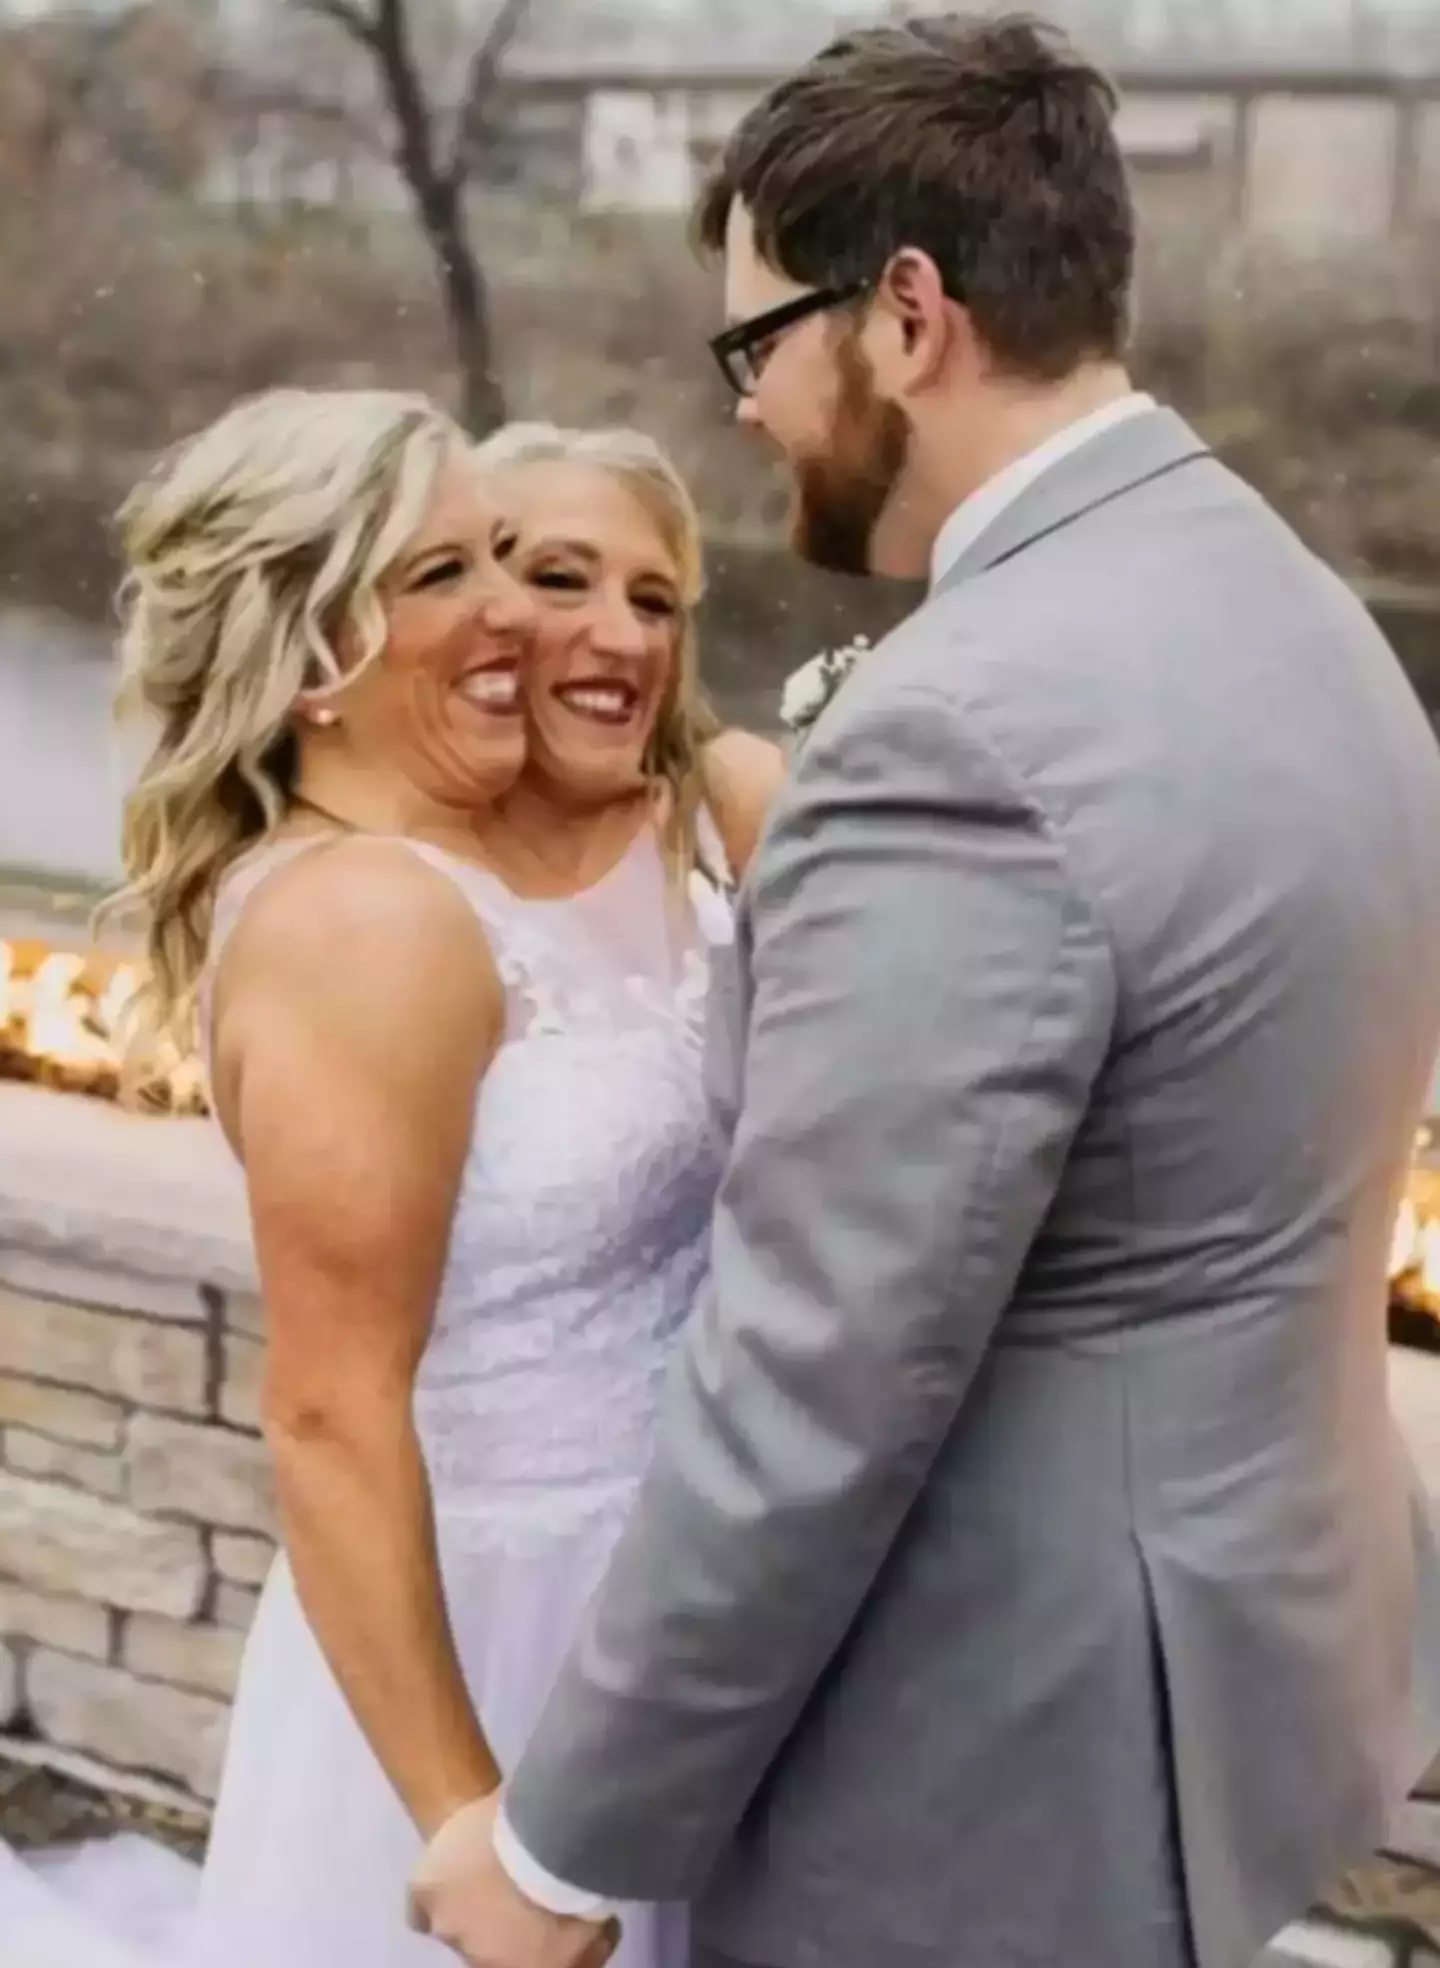 Amy married US veteran Josh Bowling and the marriage has everyone asking the same question.